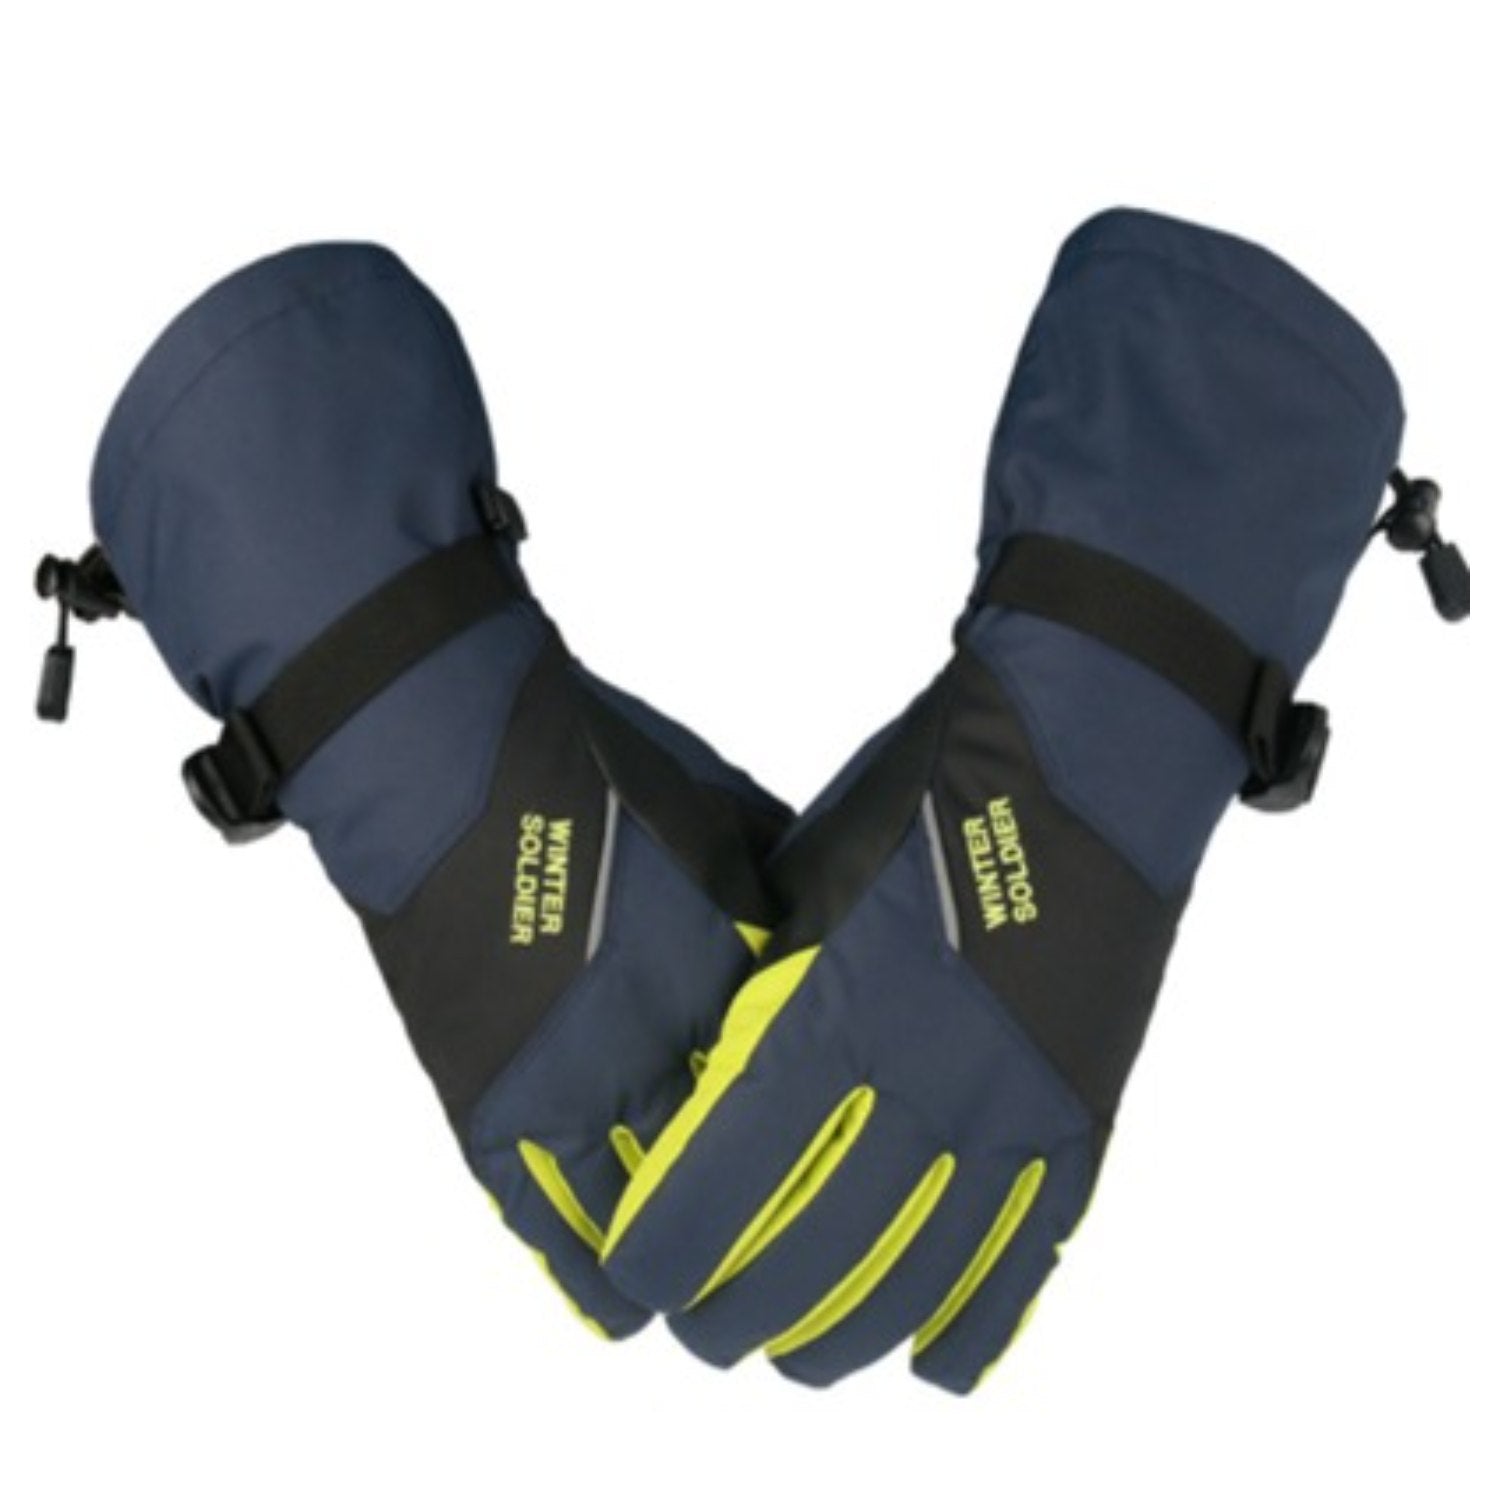 Buy Gokyo K2 Extreme Cold Weather Gloves Blue/ Yellow | Cold Weather Gloves at Gokyo Outdoor Clothing & Gear